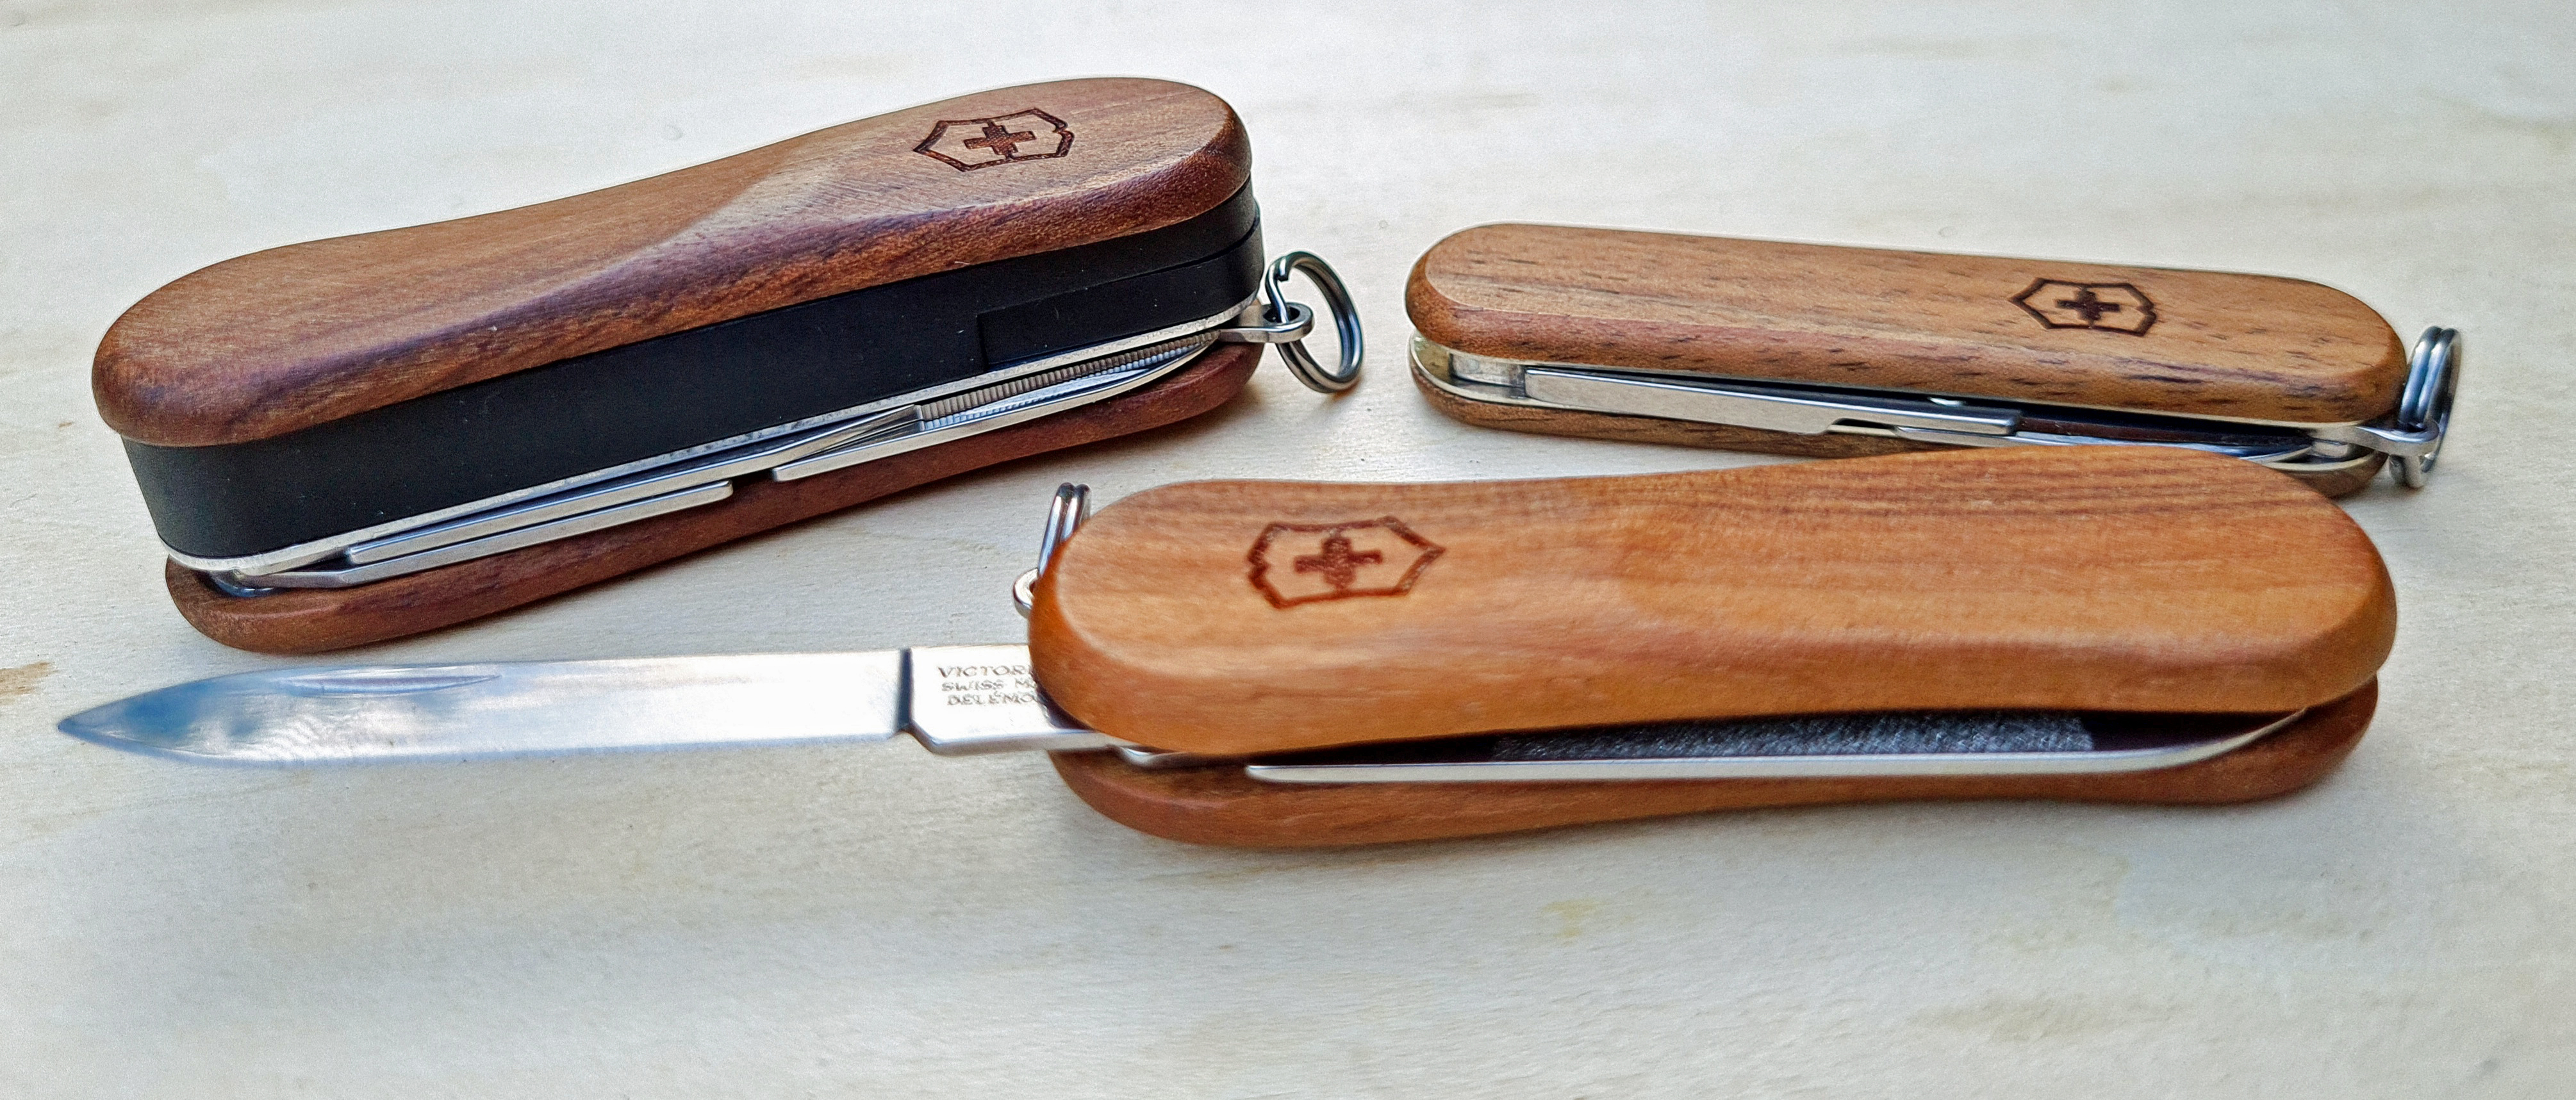 Nailclip 580, Evowood 81, Classic SD Wood